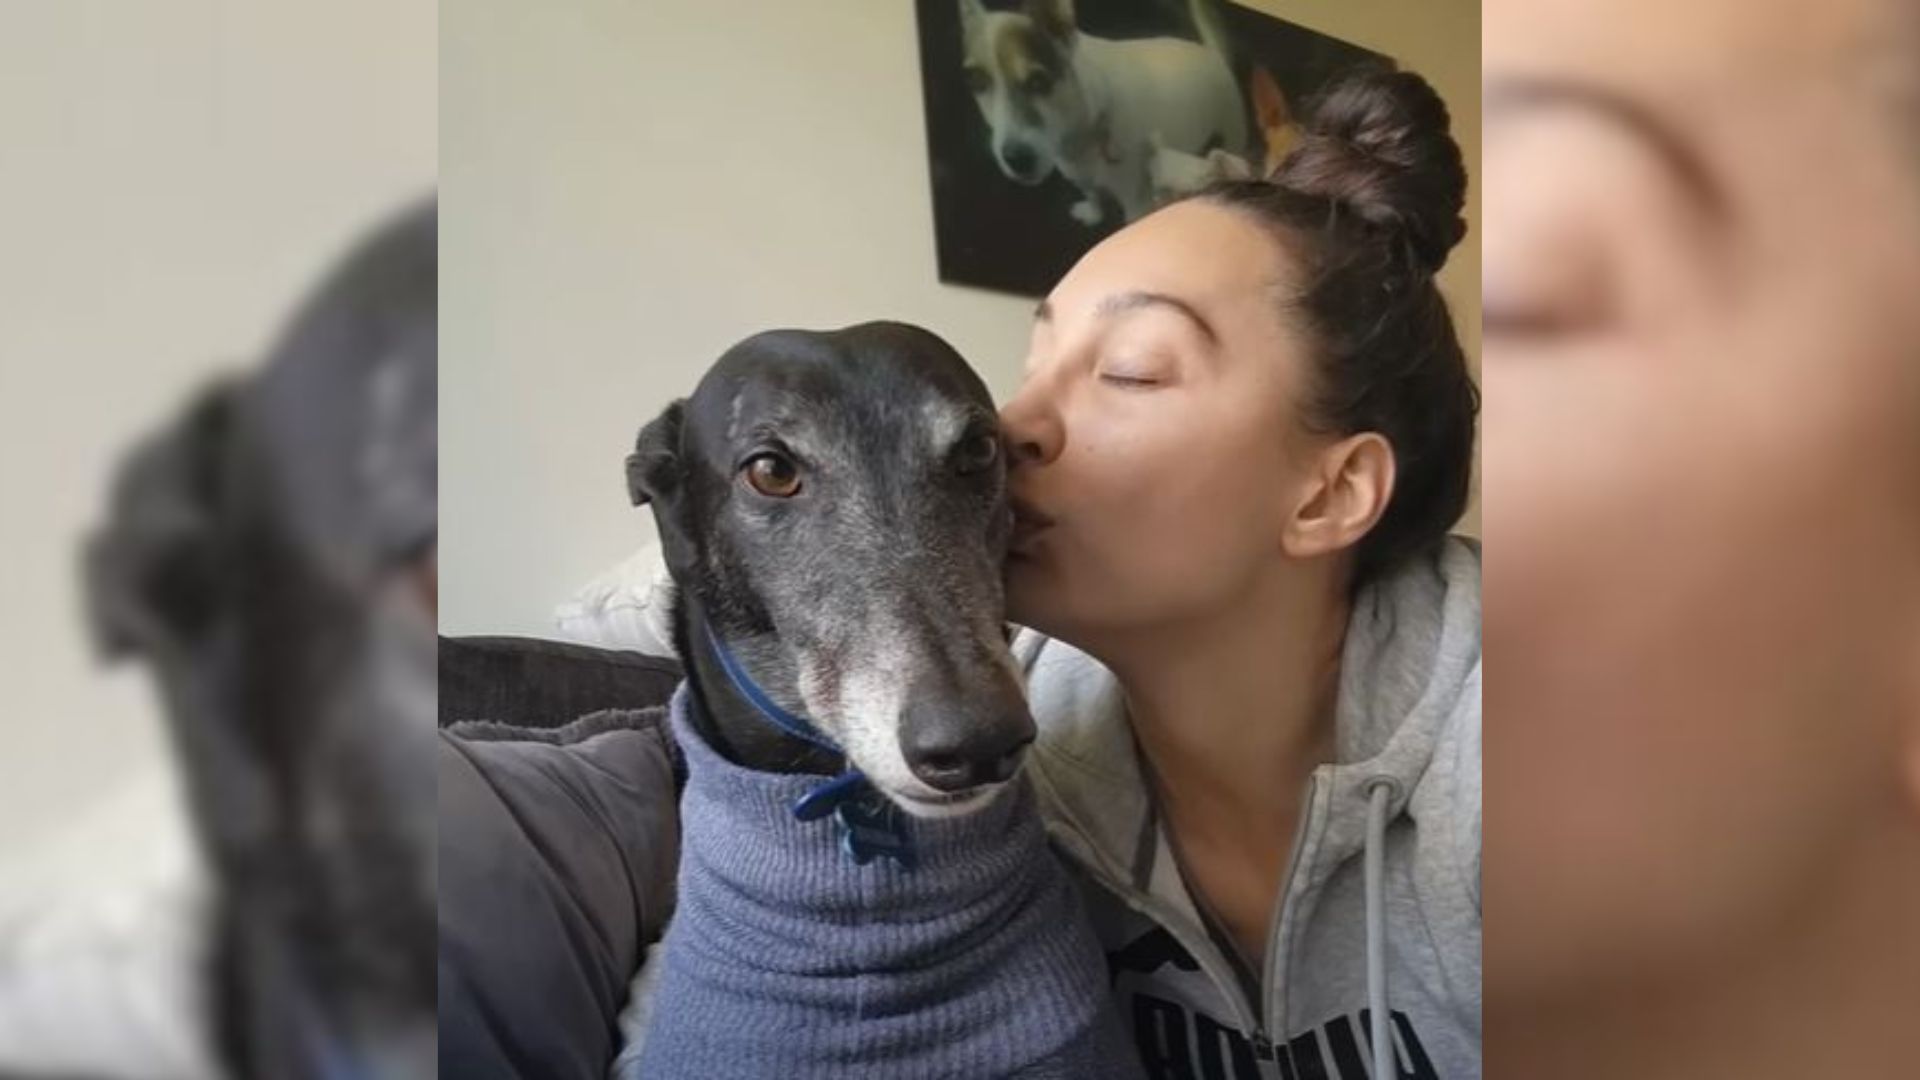 Couple Gives Home To Racing Greyhound, Then Comes A Heartbreak